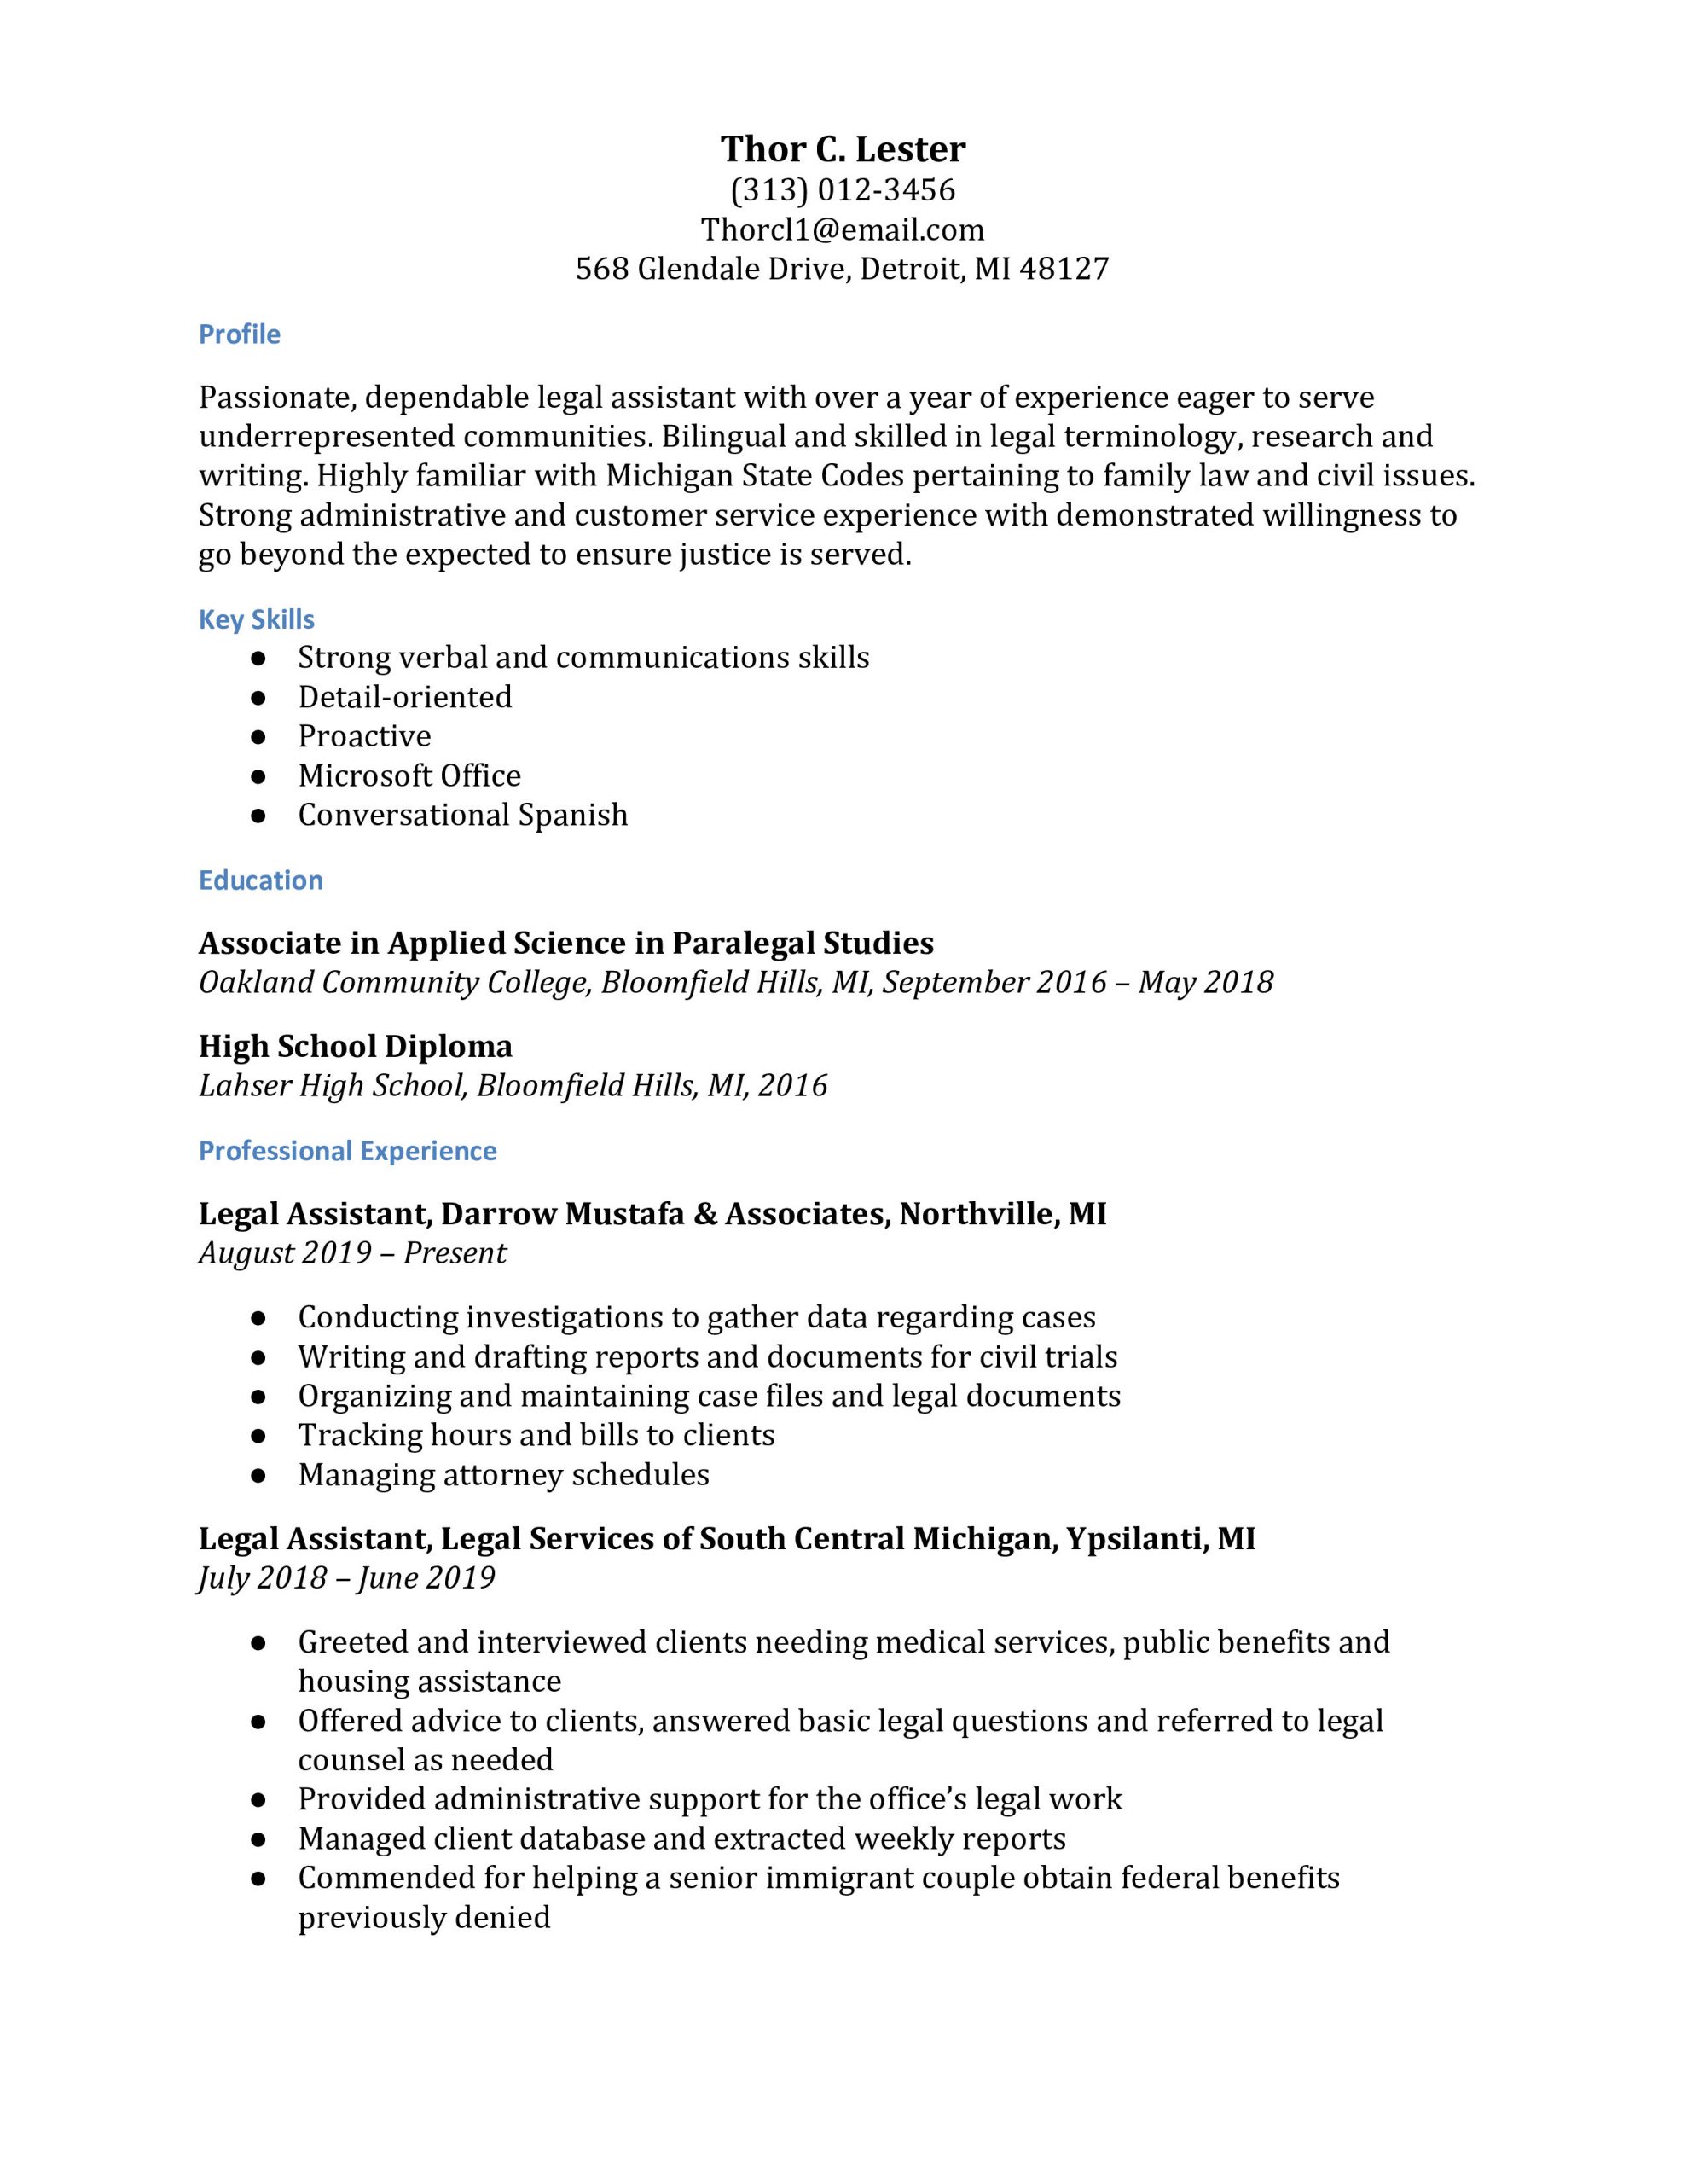 legal assistant resume examples